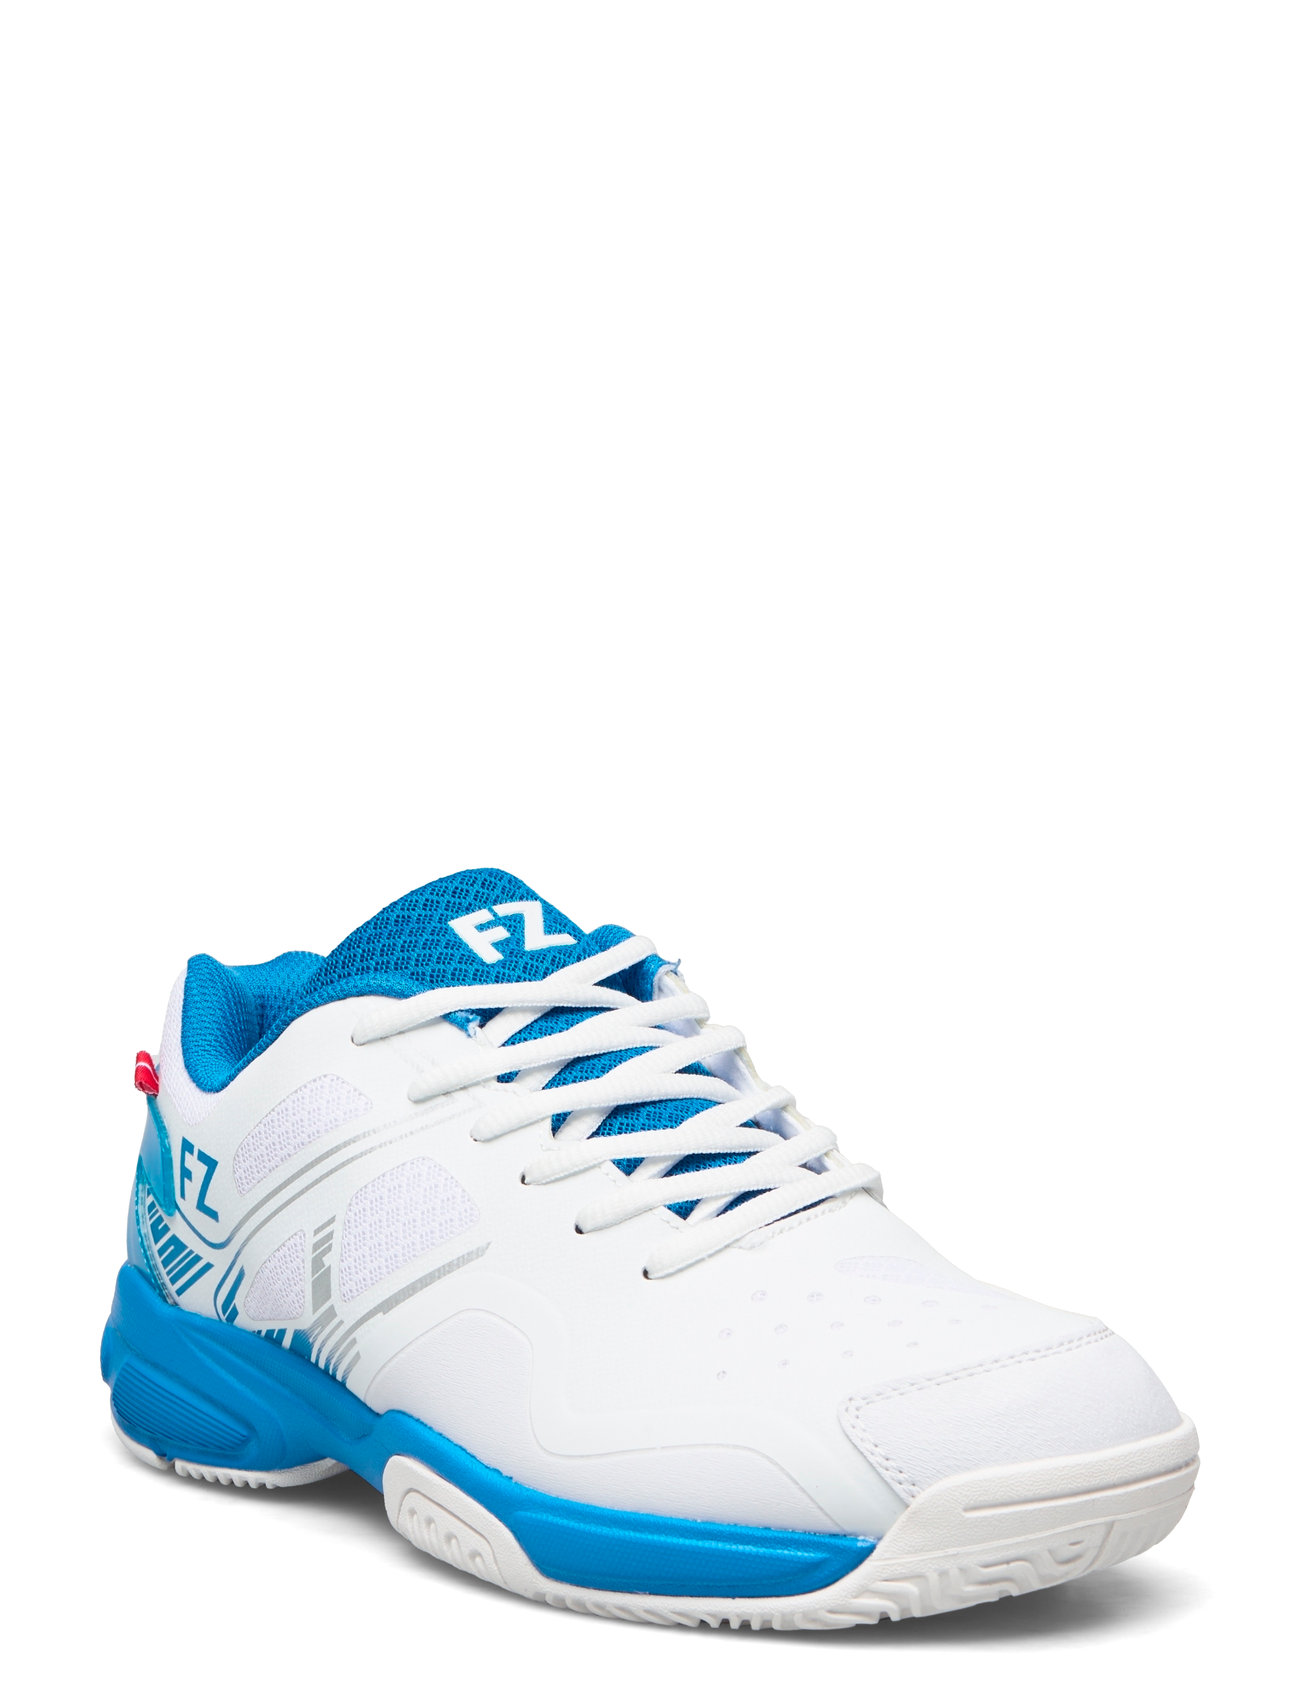 Ace Padel M Sport Sport Shoes Racketsports Shoes Padel Shoes White FZ Forza